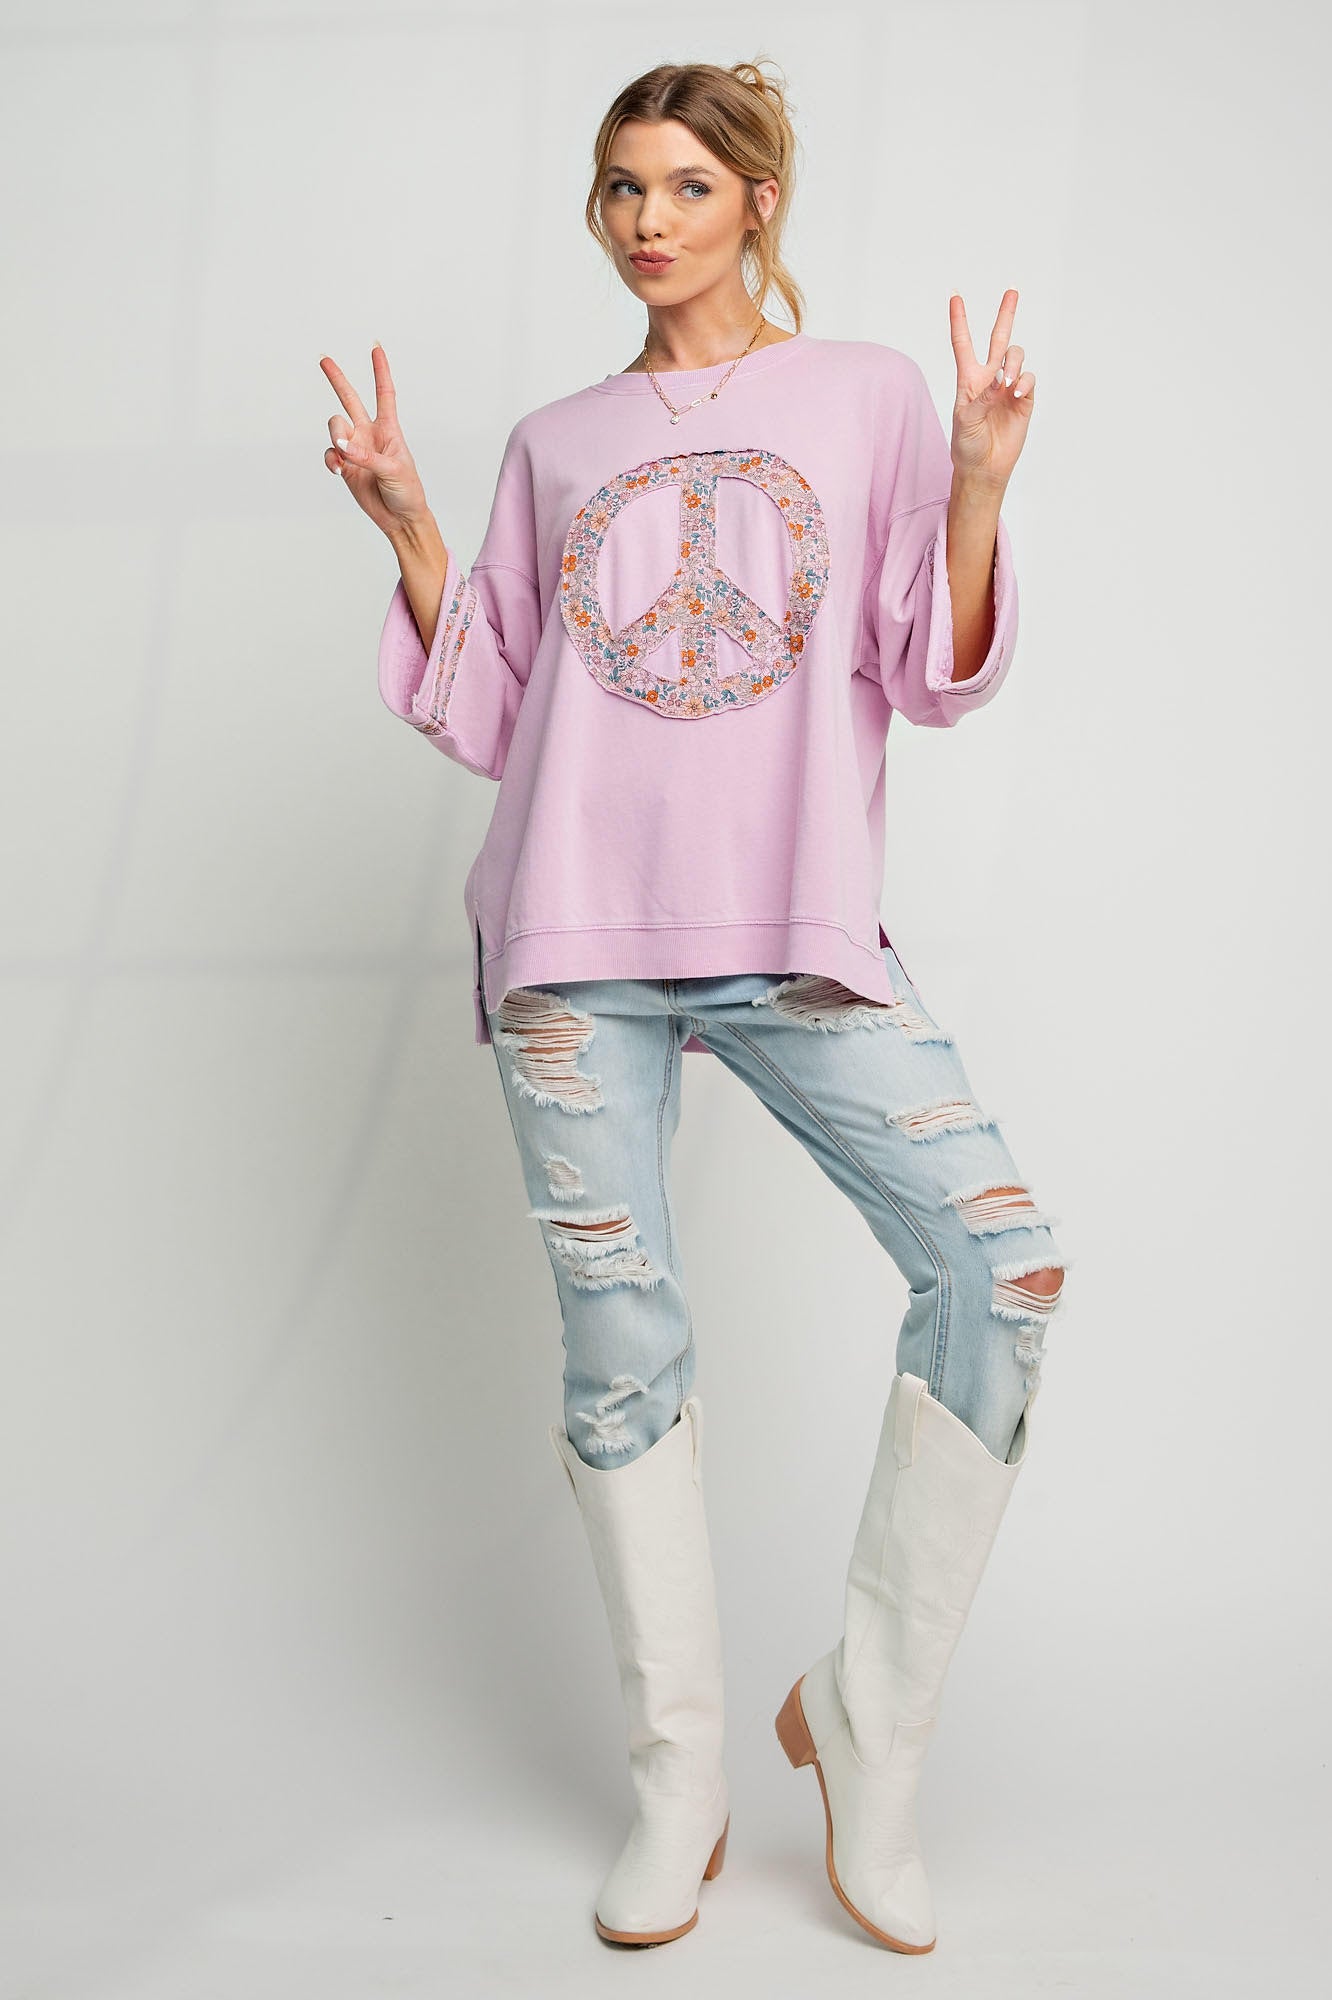 Cici Half Sleeve Peace Sign Top in Pink